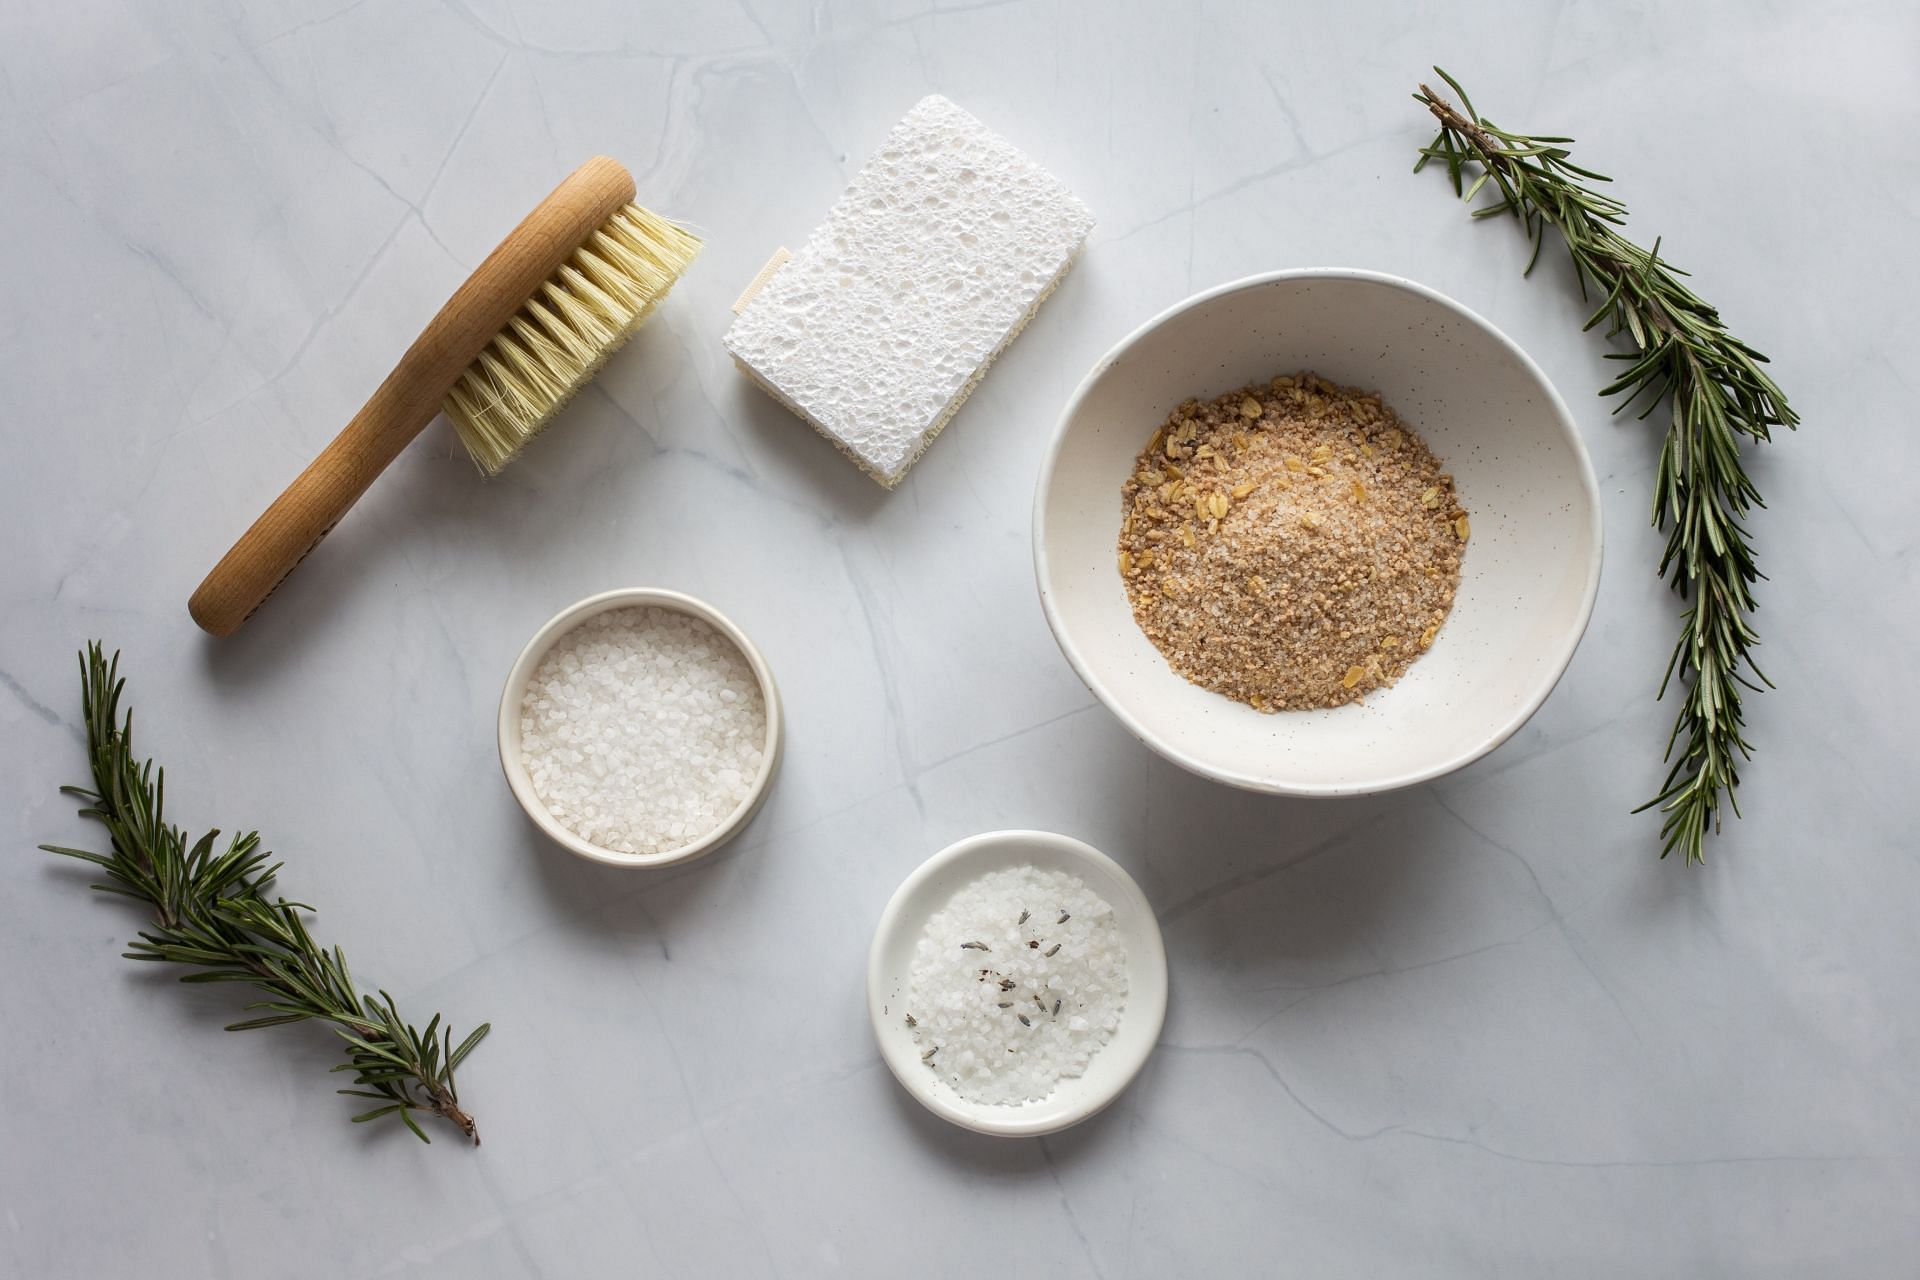 Exfoliating your face and body will help remove dead skin cells. (Image via Pexels / Monstera)